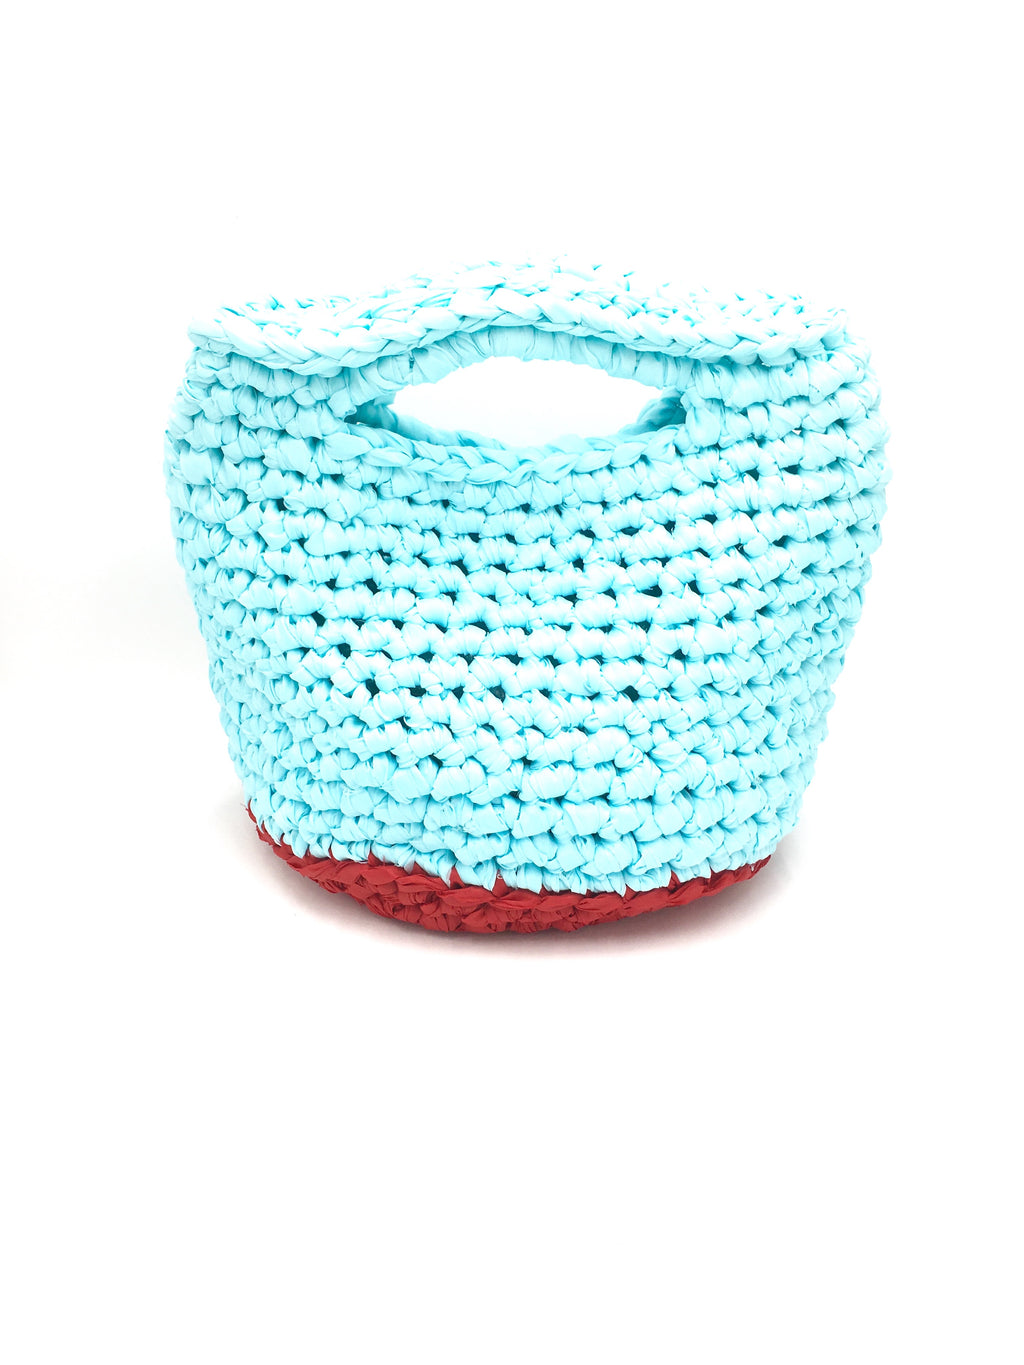 I love Syria - Bag Crochet - Turquoise and Red